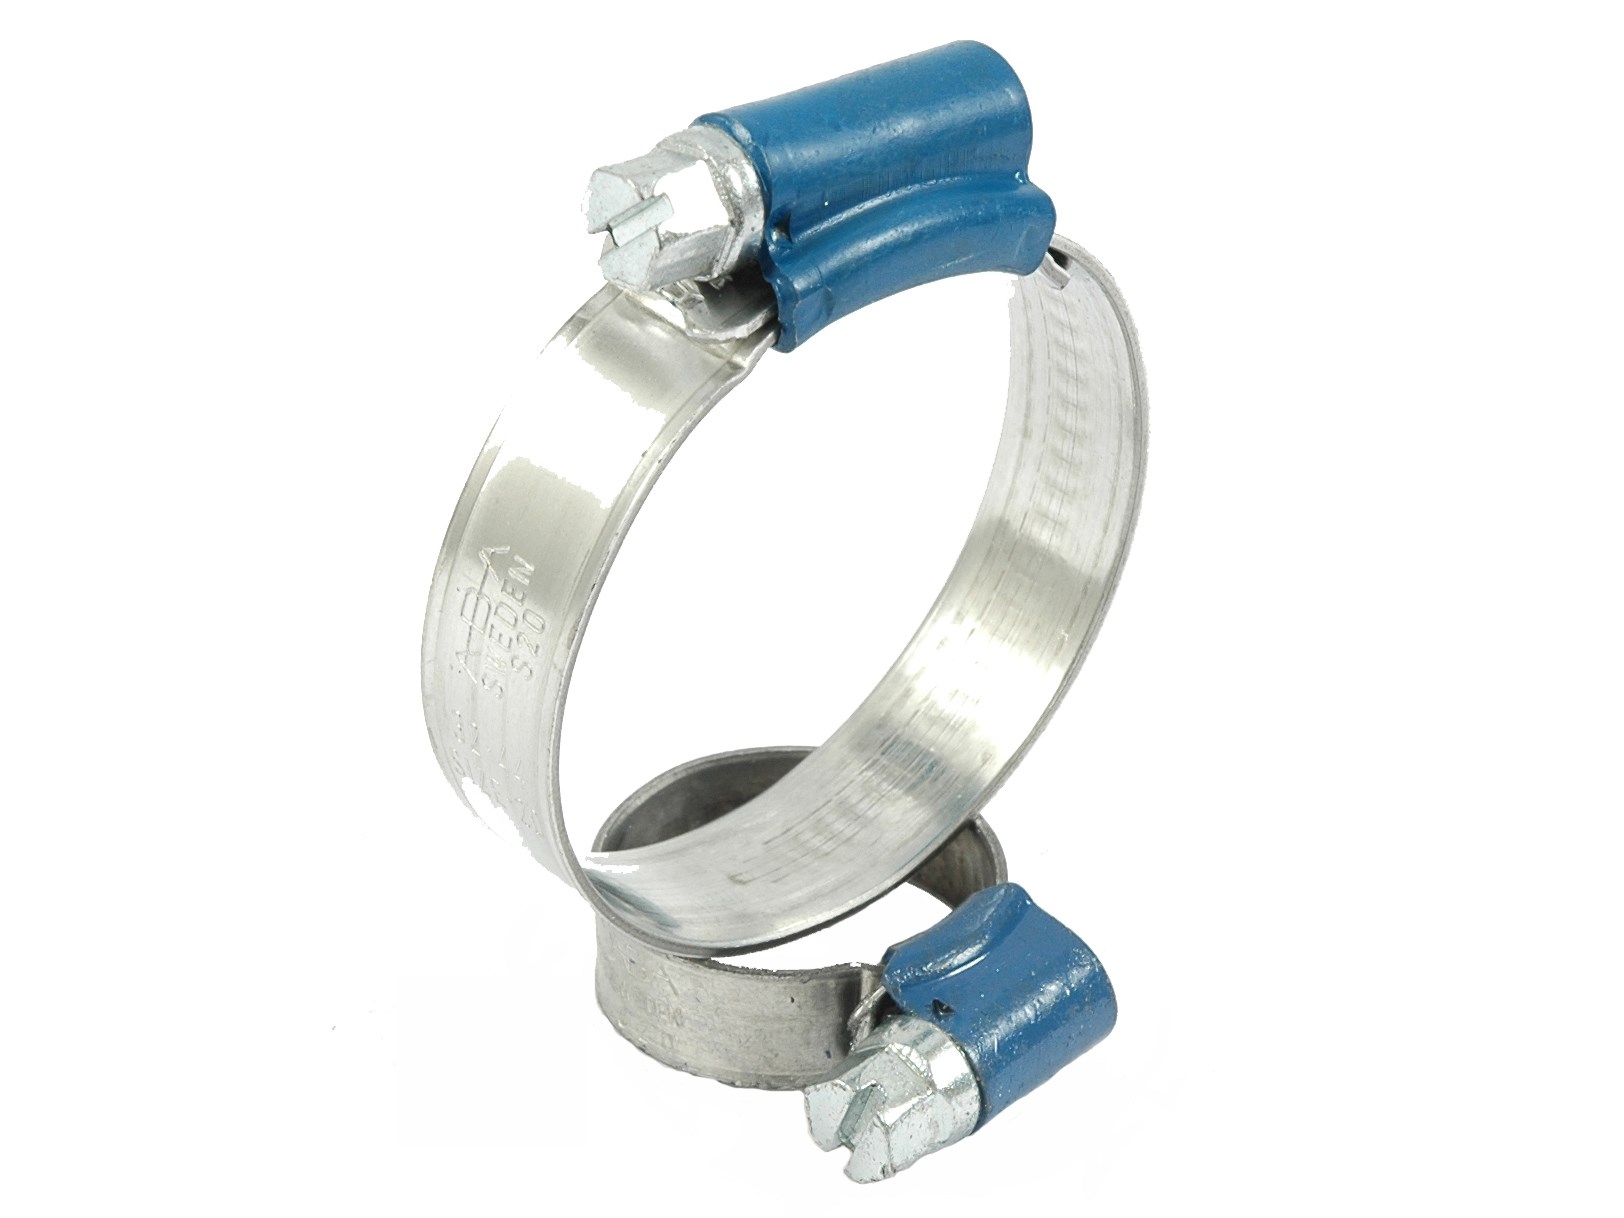 Hose Clamps for Industrial use - Powerflex